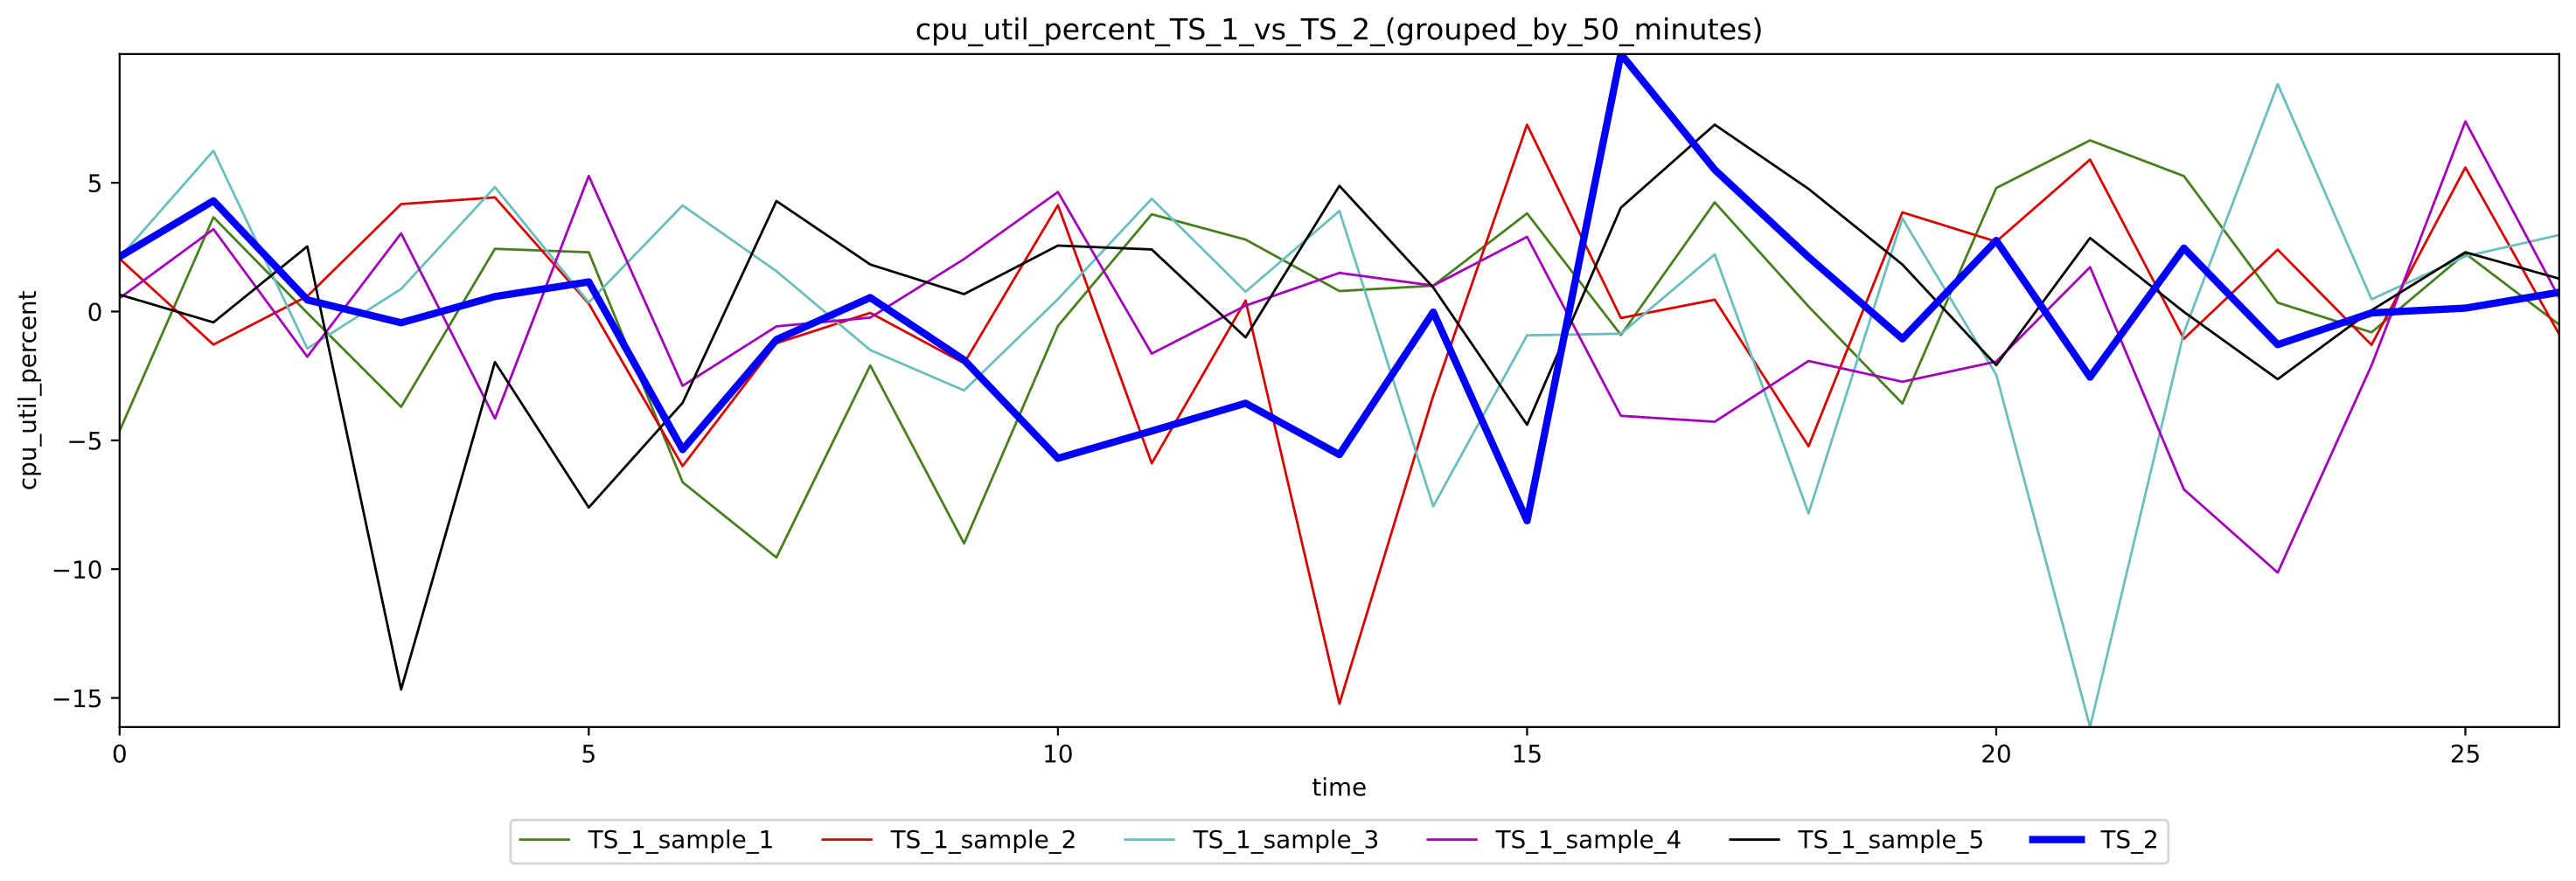 Delta Figure for used CPU percentage grouped by 50 minutes